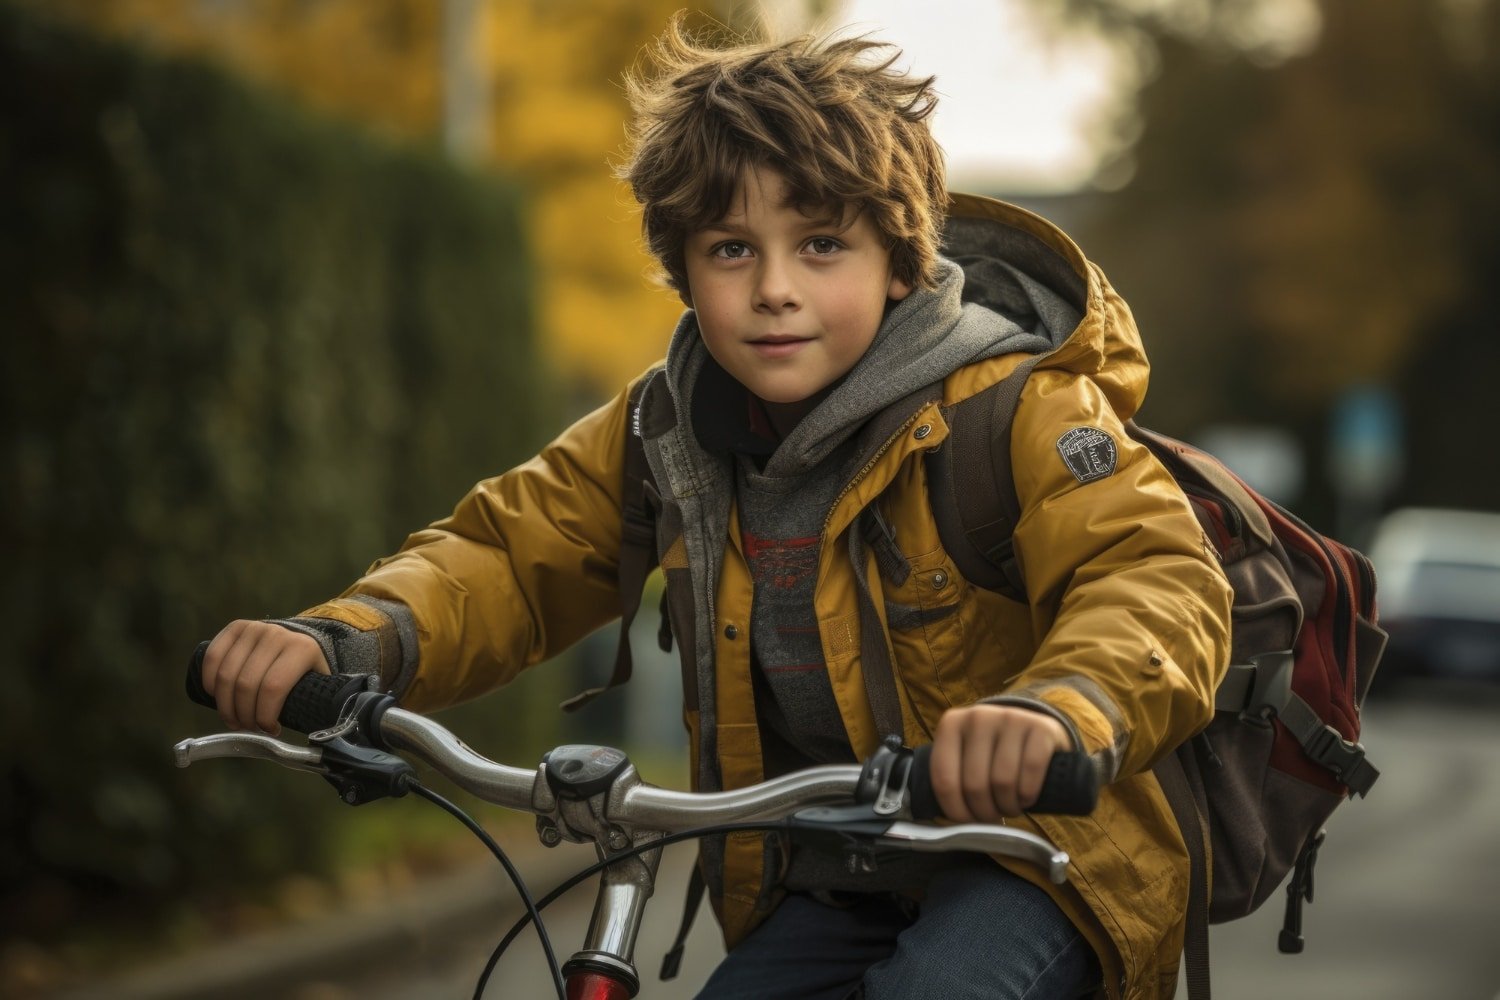 You are currently viewing Guardian Bikes Safety First: The Ultimate Kids’ Bike